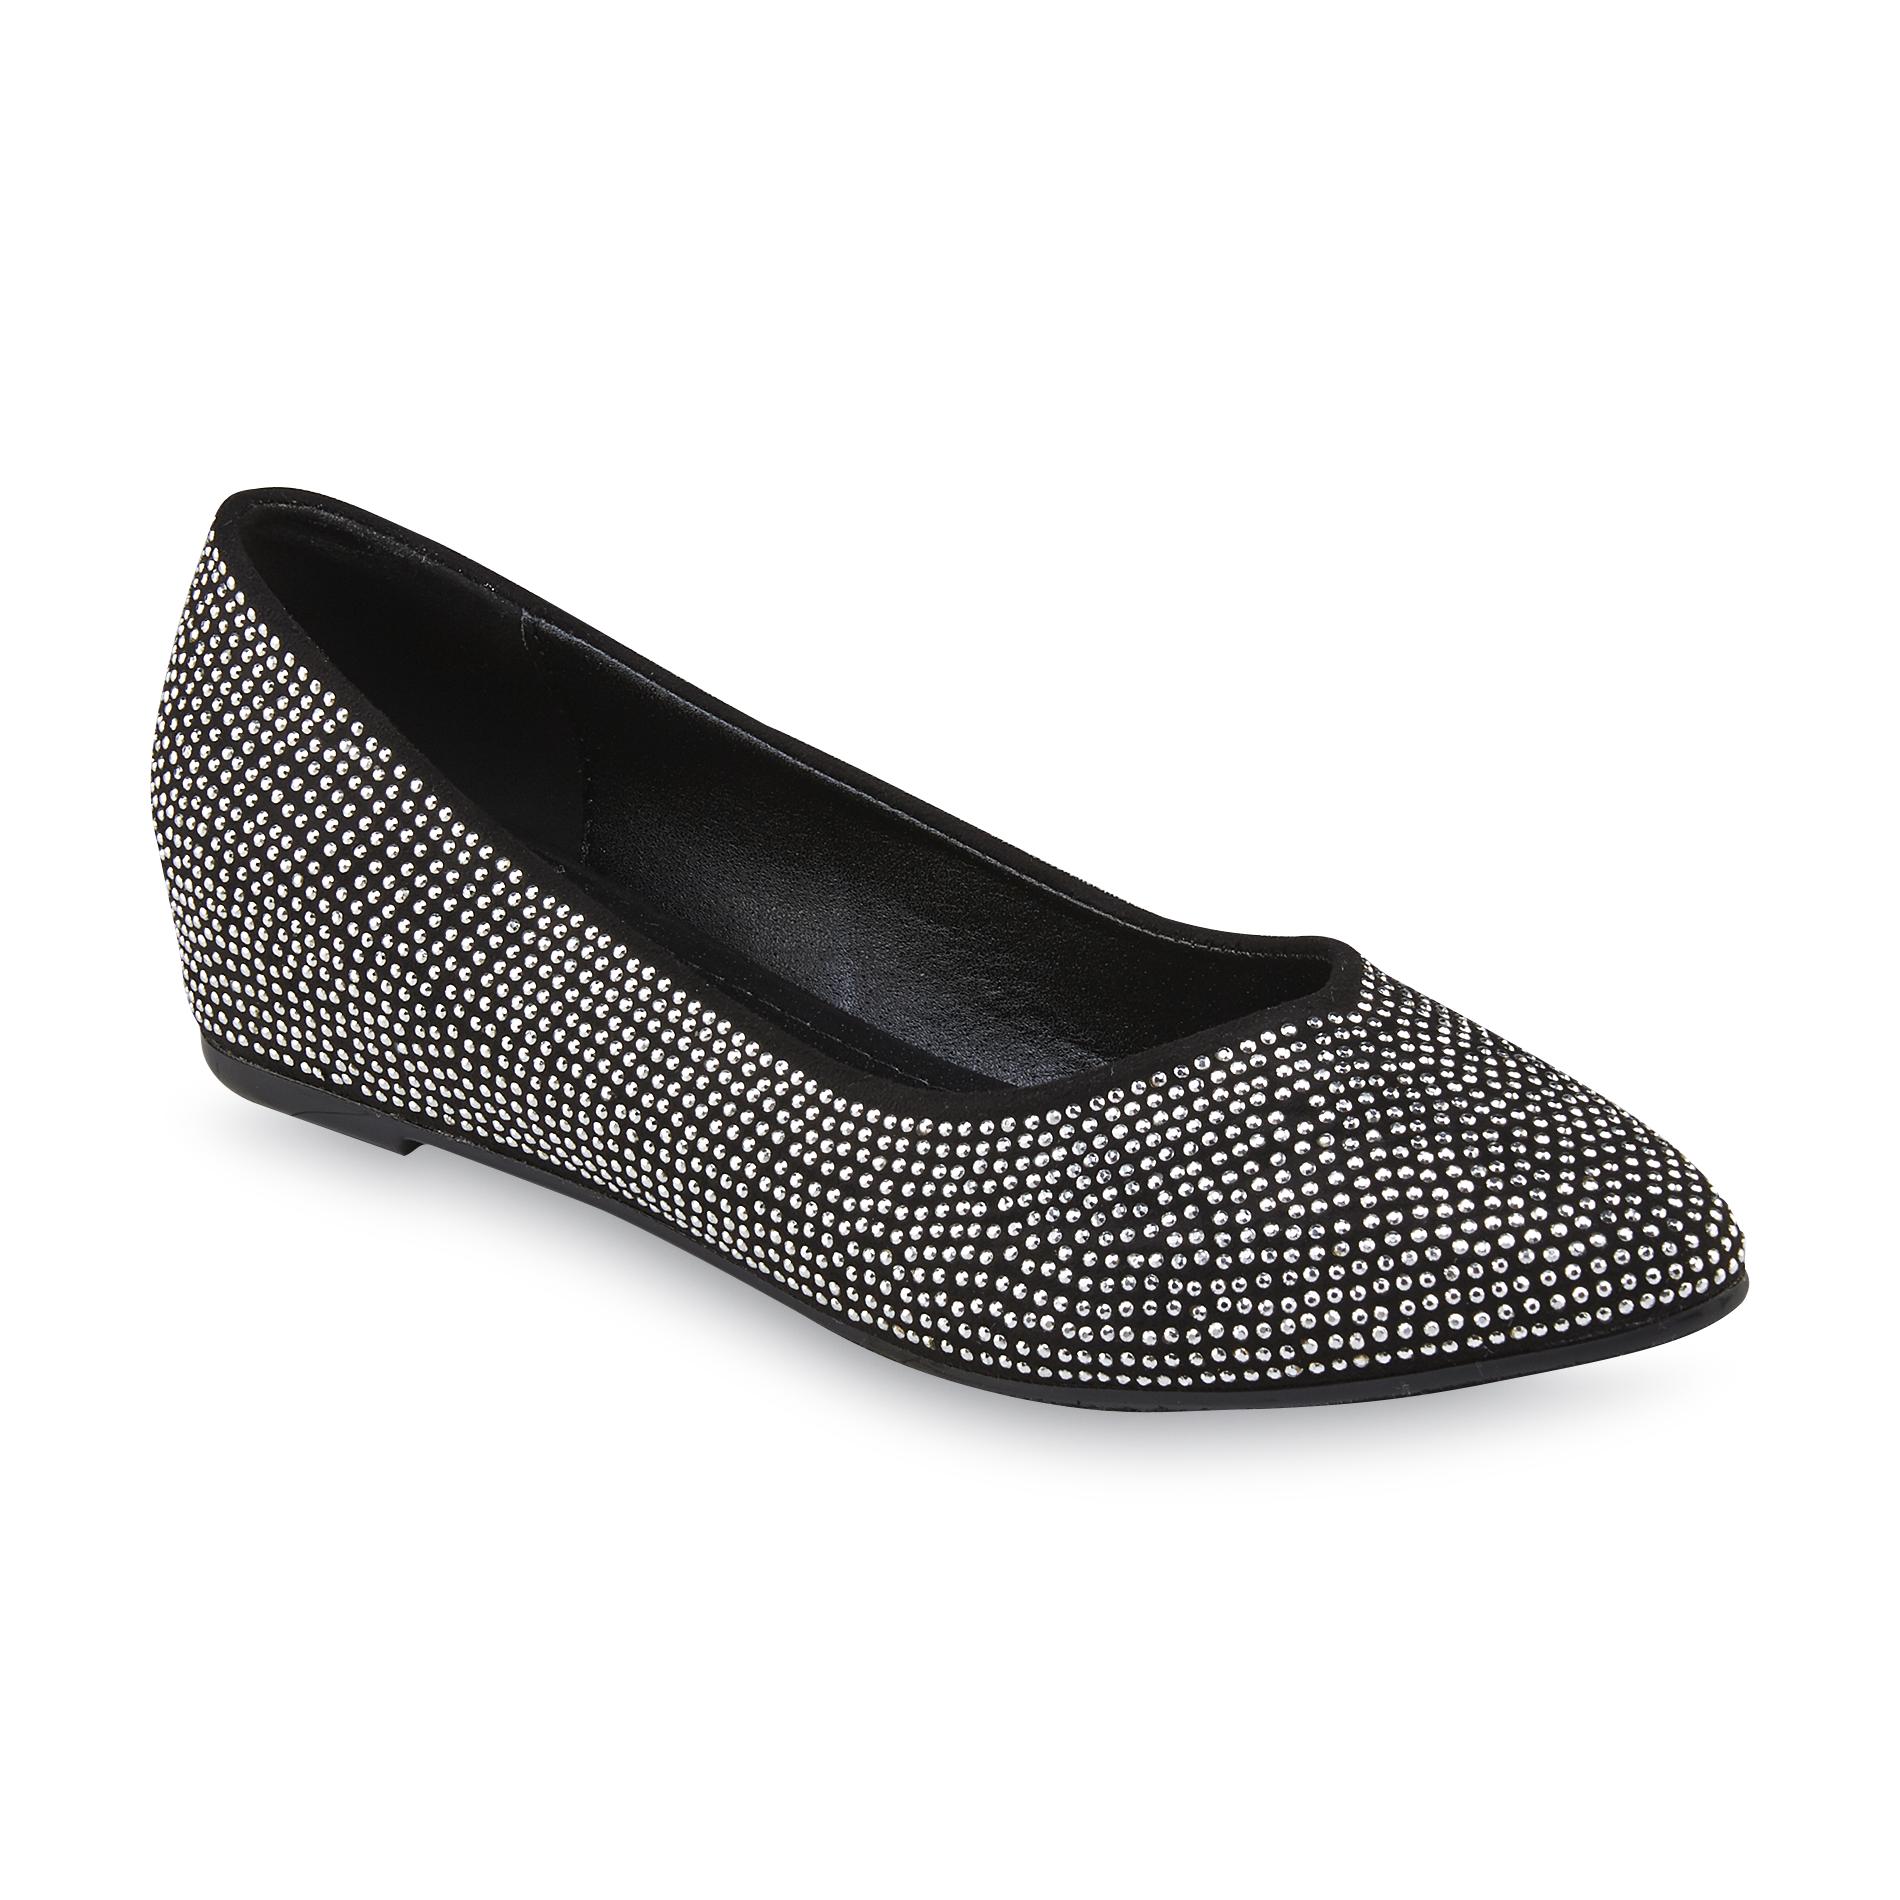 Attention Women's Millary Black/Silver Embellished Flat